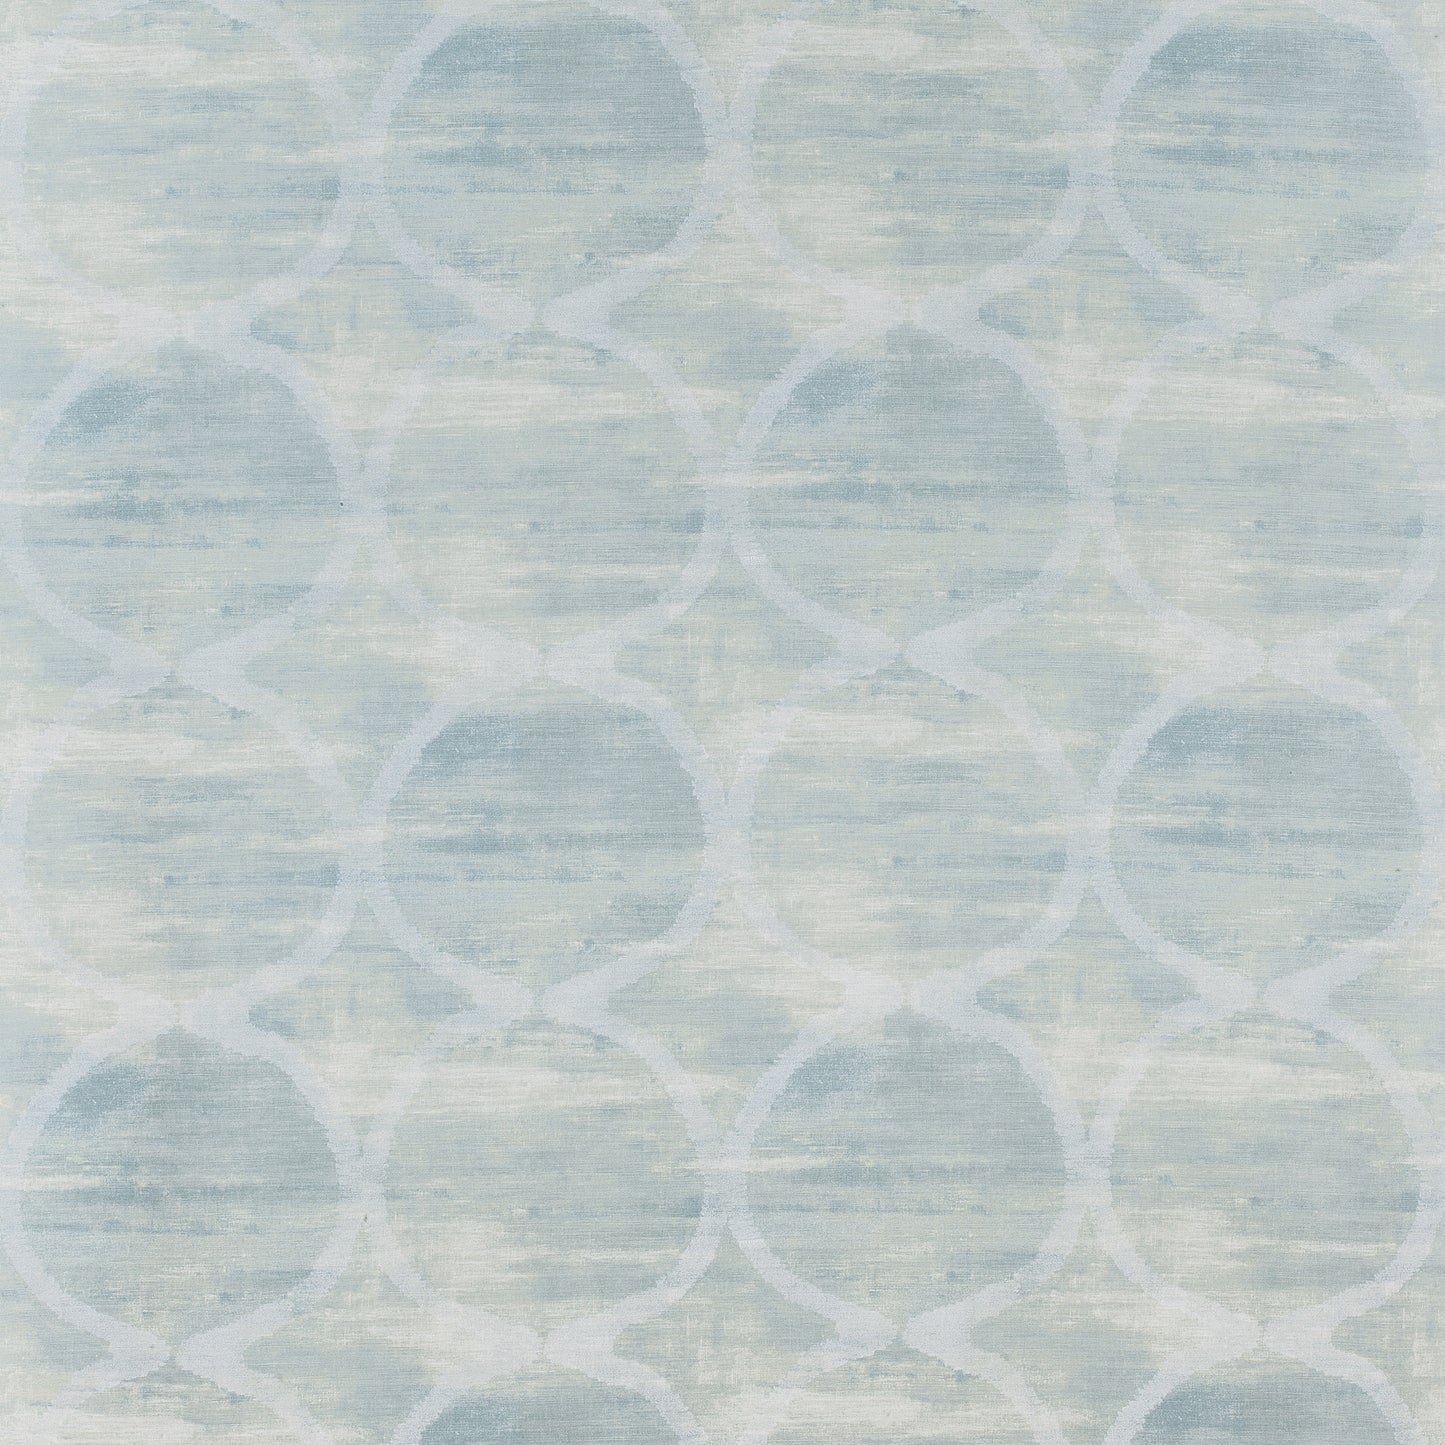 Purchase  Ann French Fabric SKU AF73034  pattern name  Watercourse